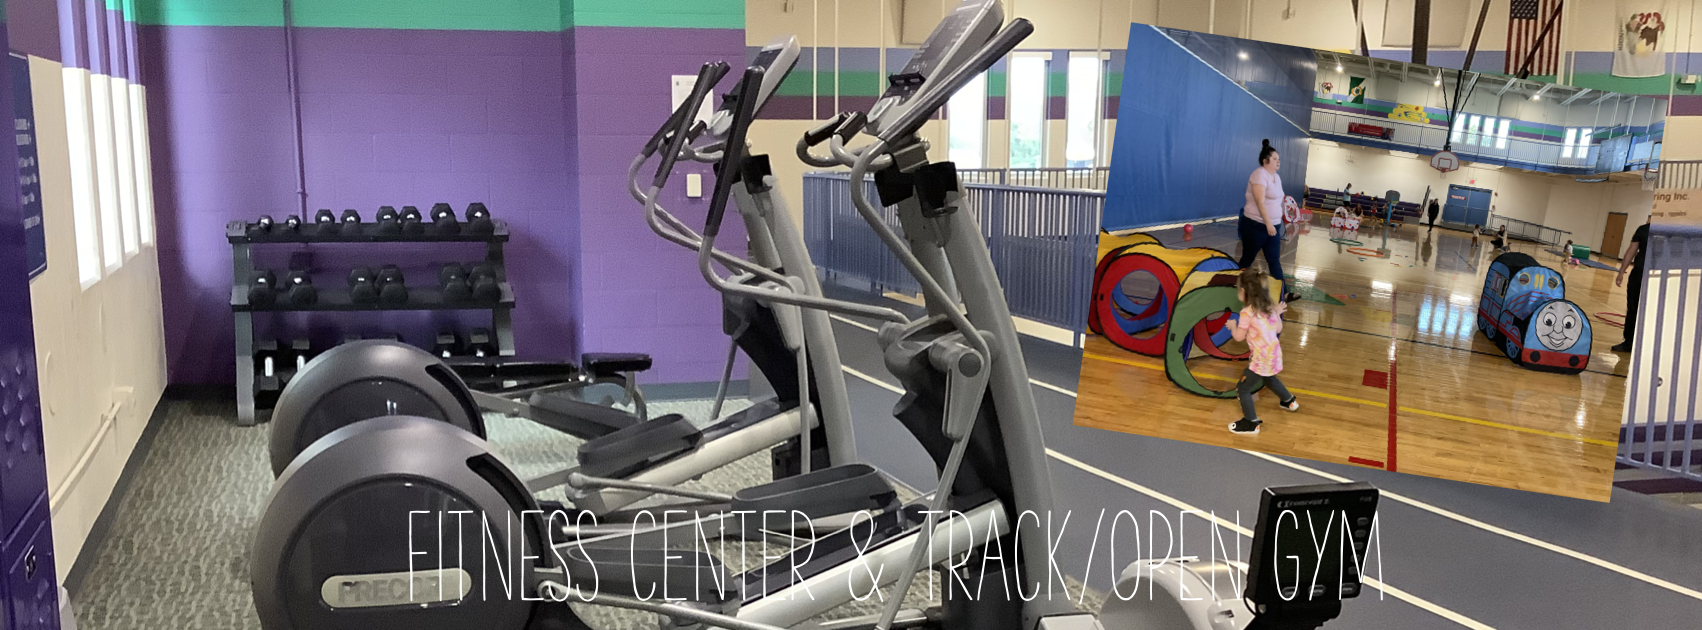 Fitness center and track/open gym advertisement